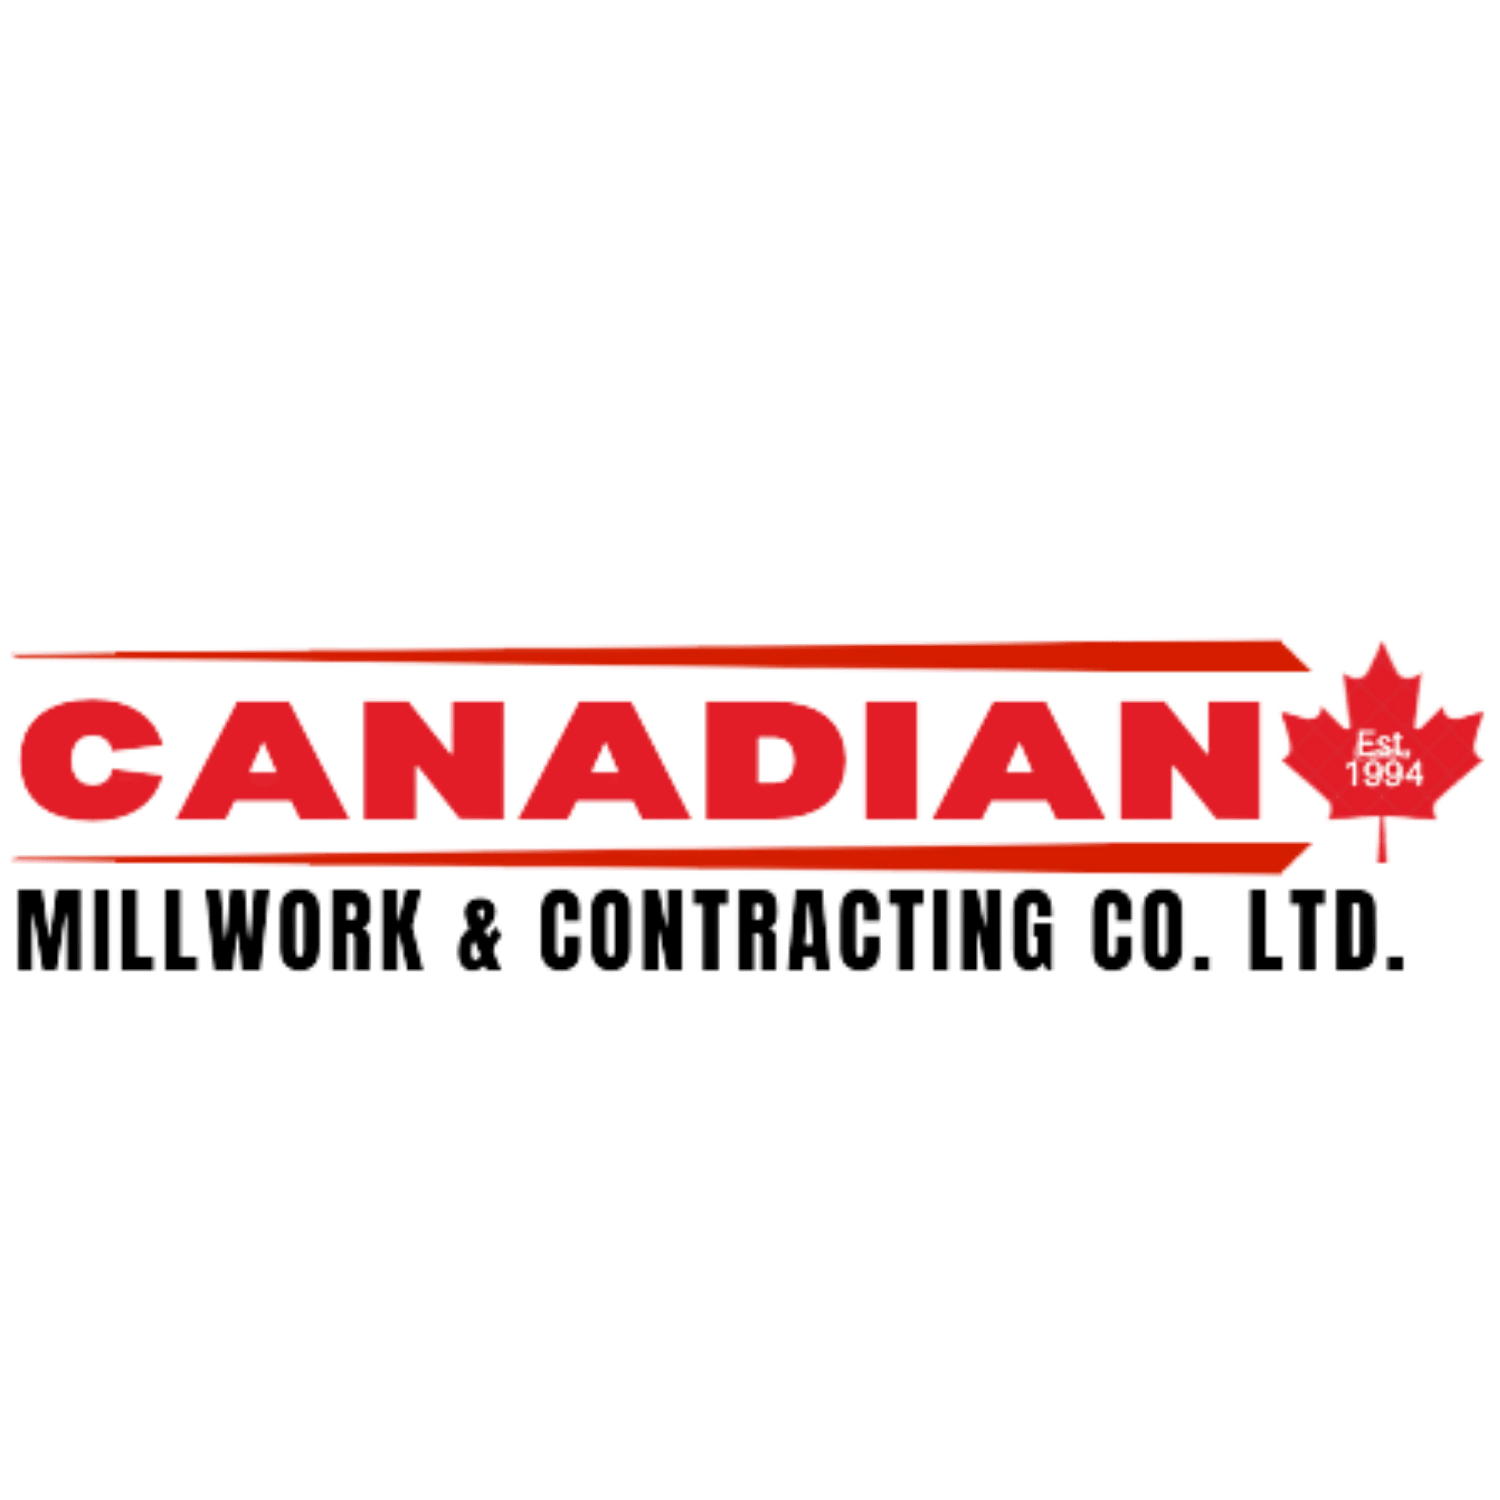 Canadian Millwork & Contracting